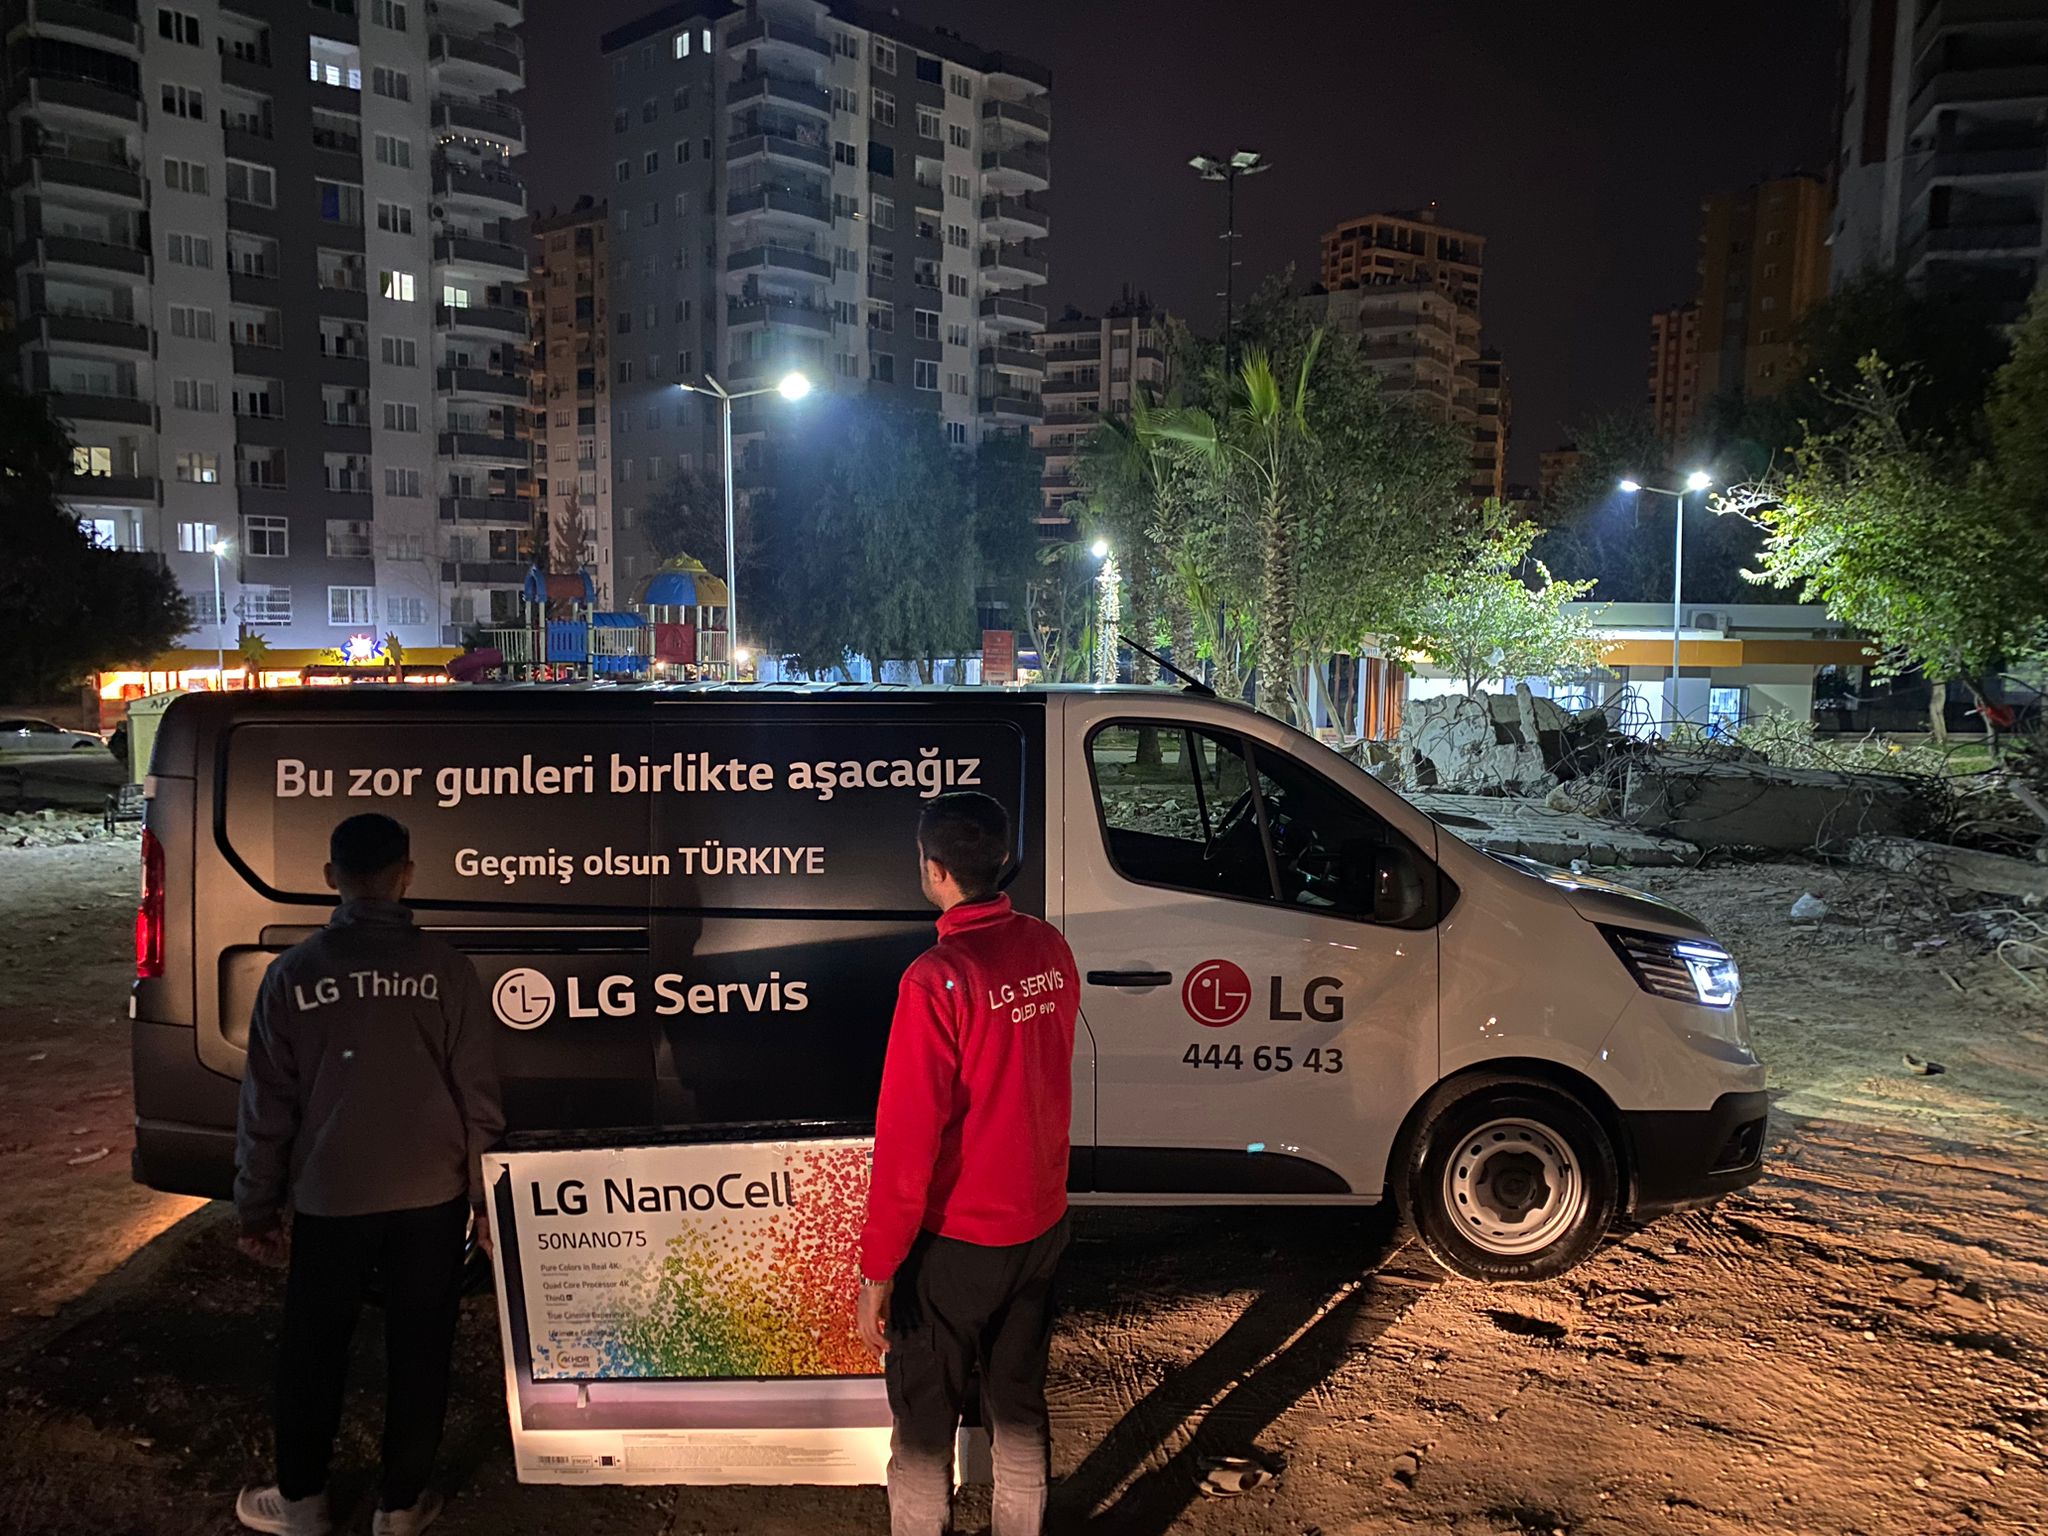 Photo of LG employees carrying LG NanoCell TV in front of LG vehicle